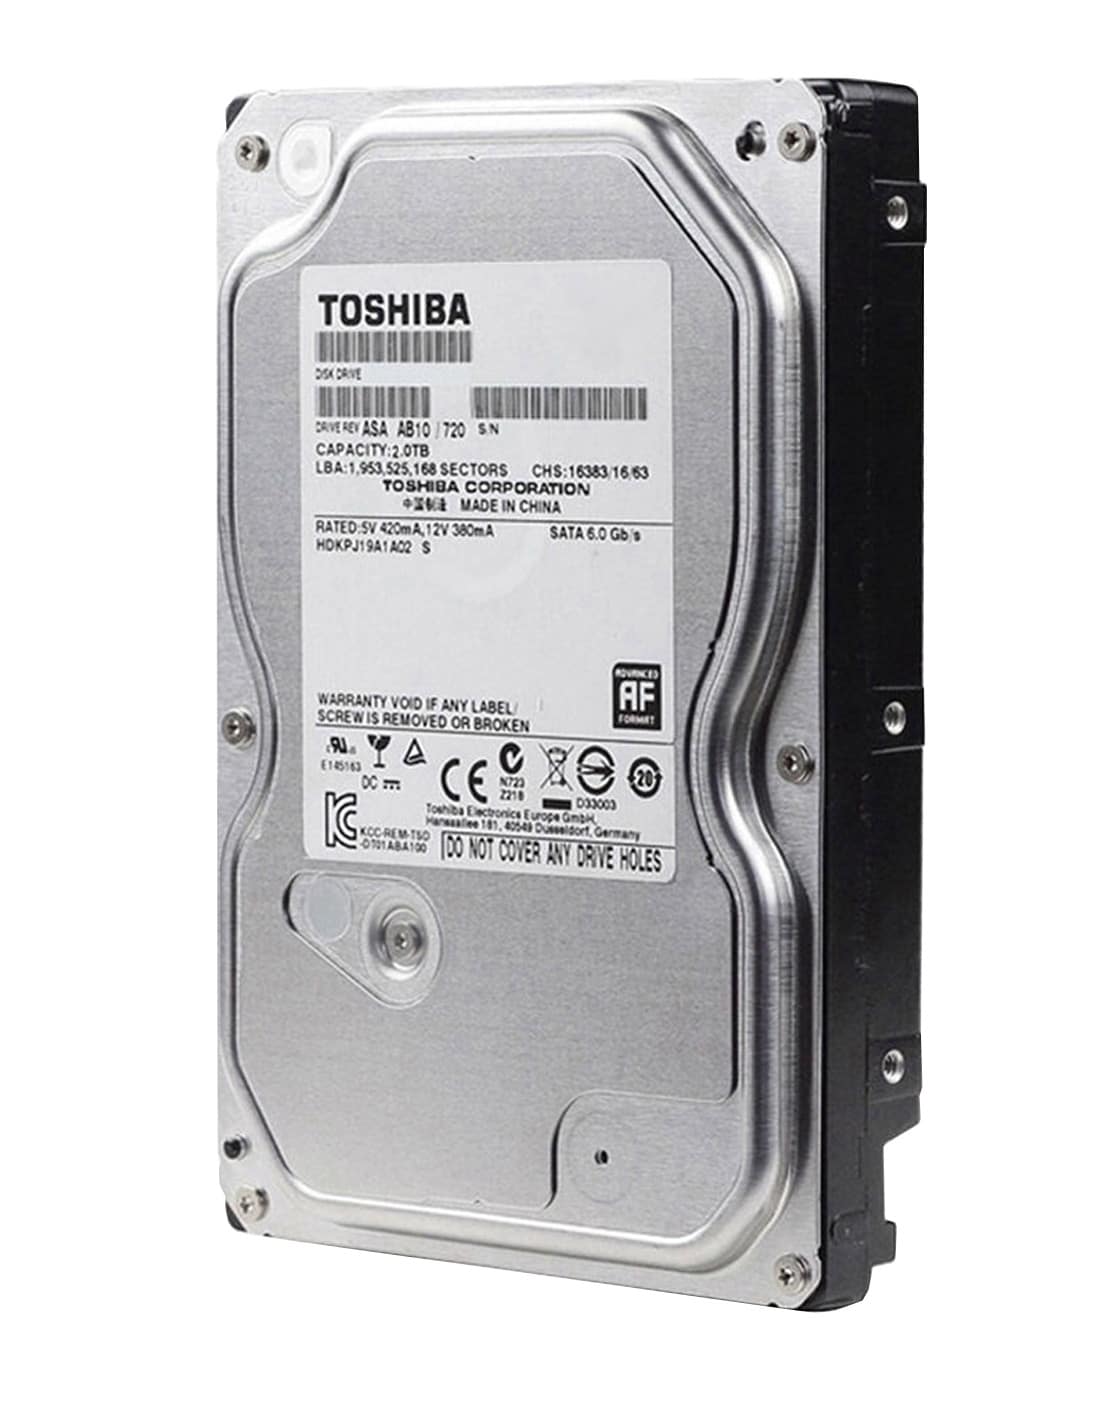 Toshiba Hard Disk Drive to suit all DVR & NVR models - 2TB HDD